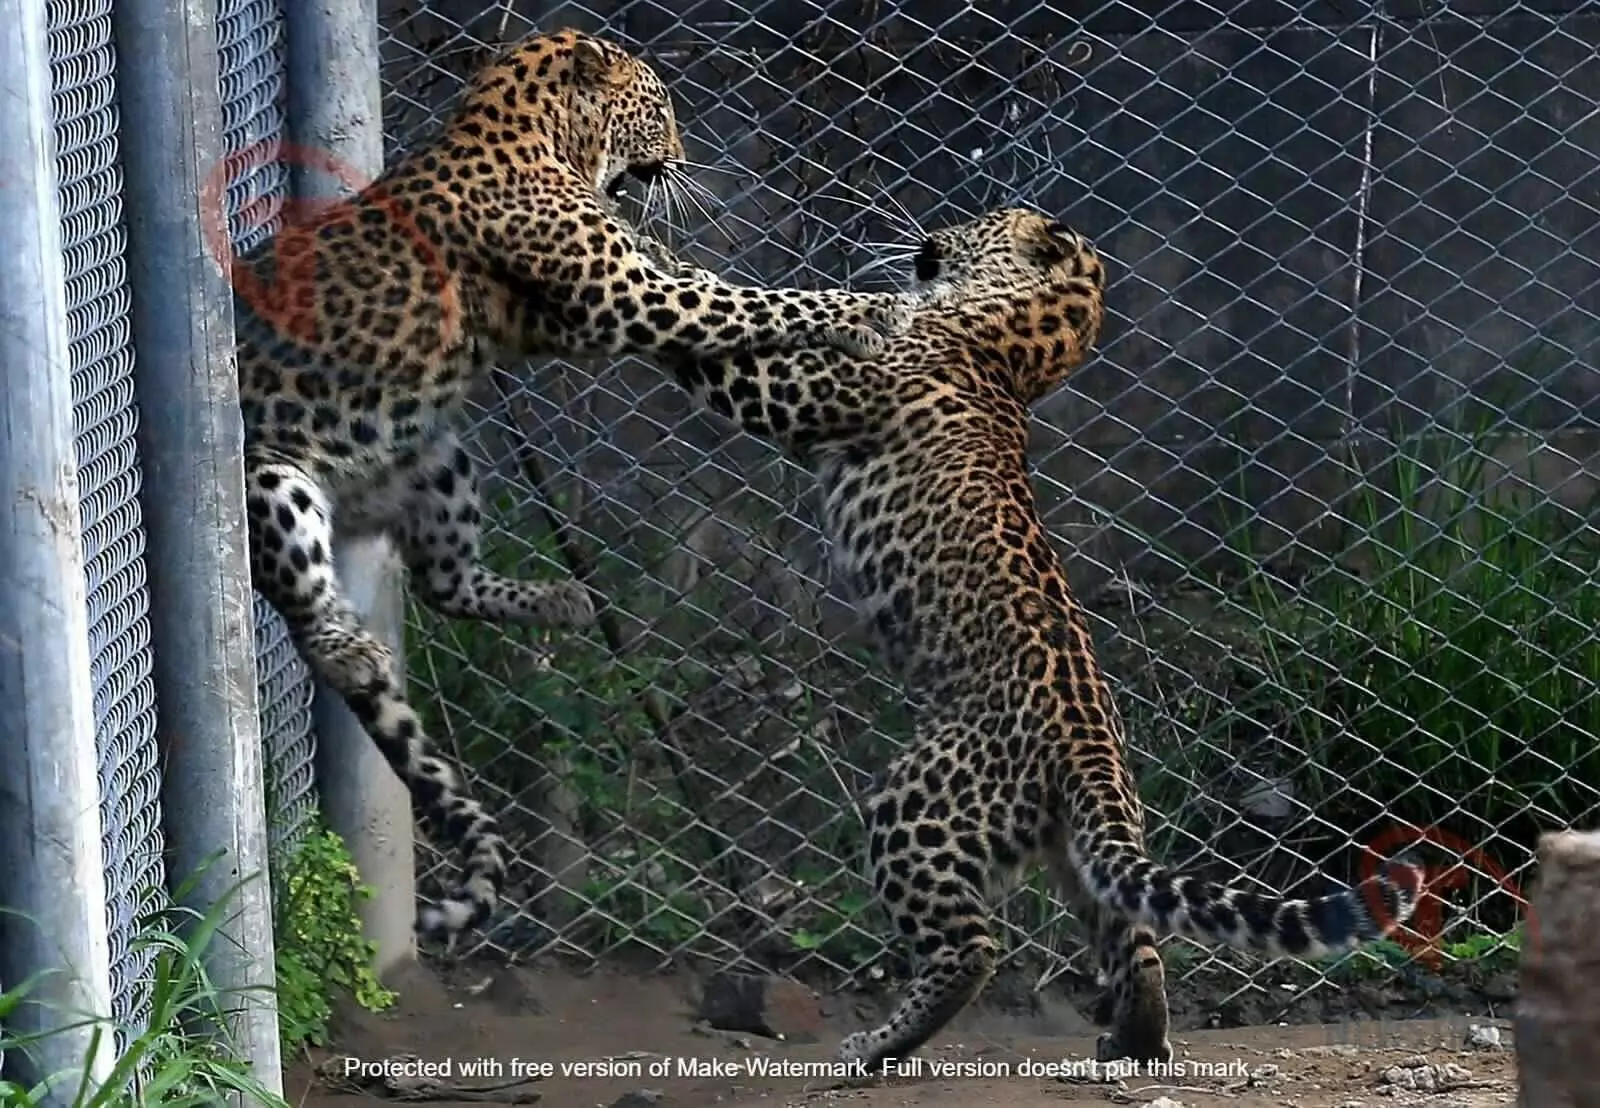 Leopards in Lucknow Zoological Park